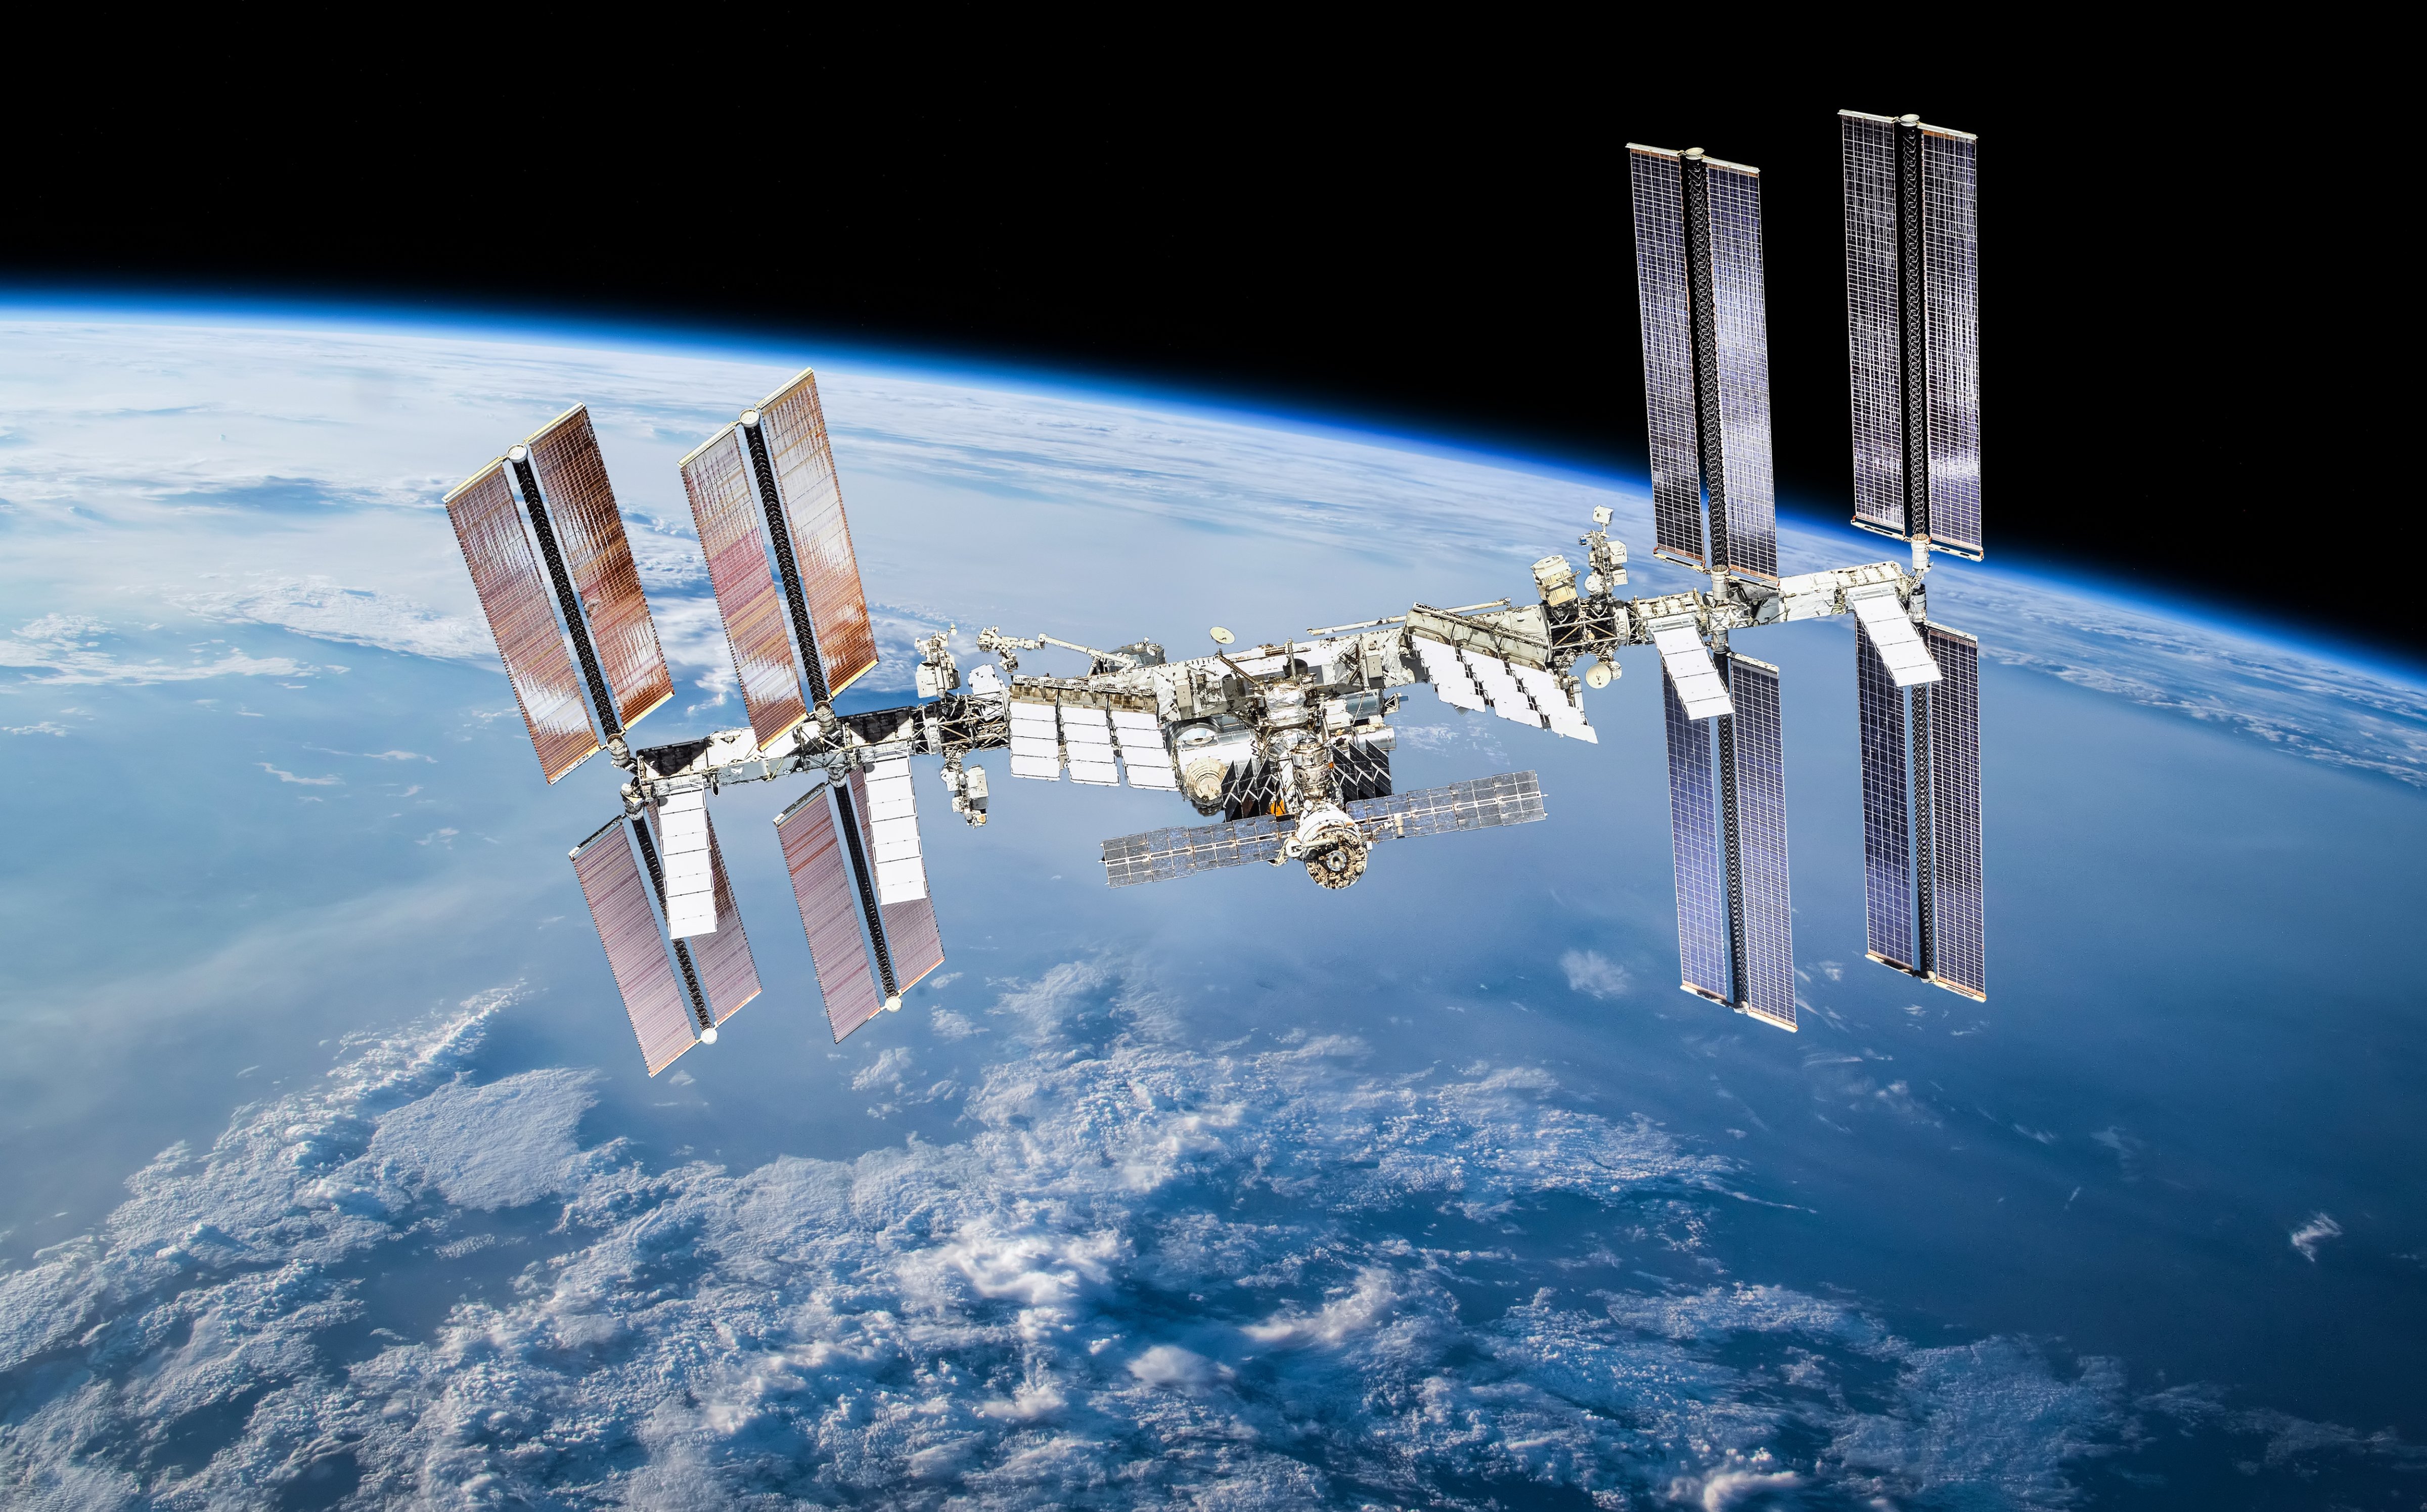 The International Space Station as it plies its rarefied orbit (Getty Images/iStockphoto)